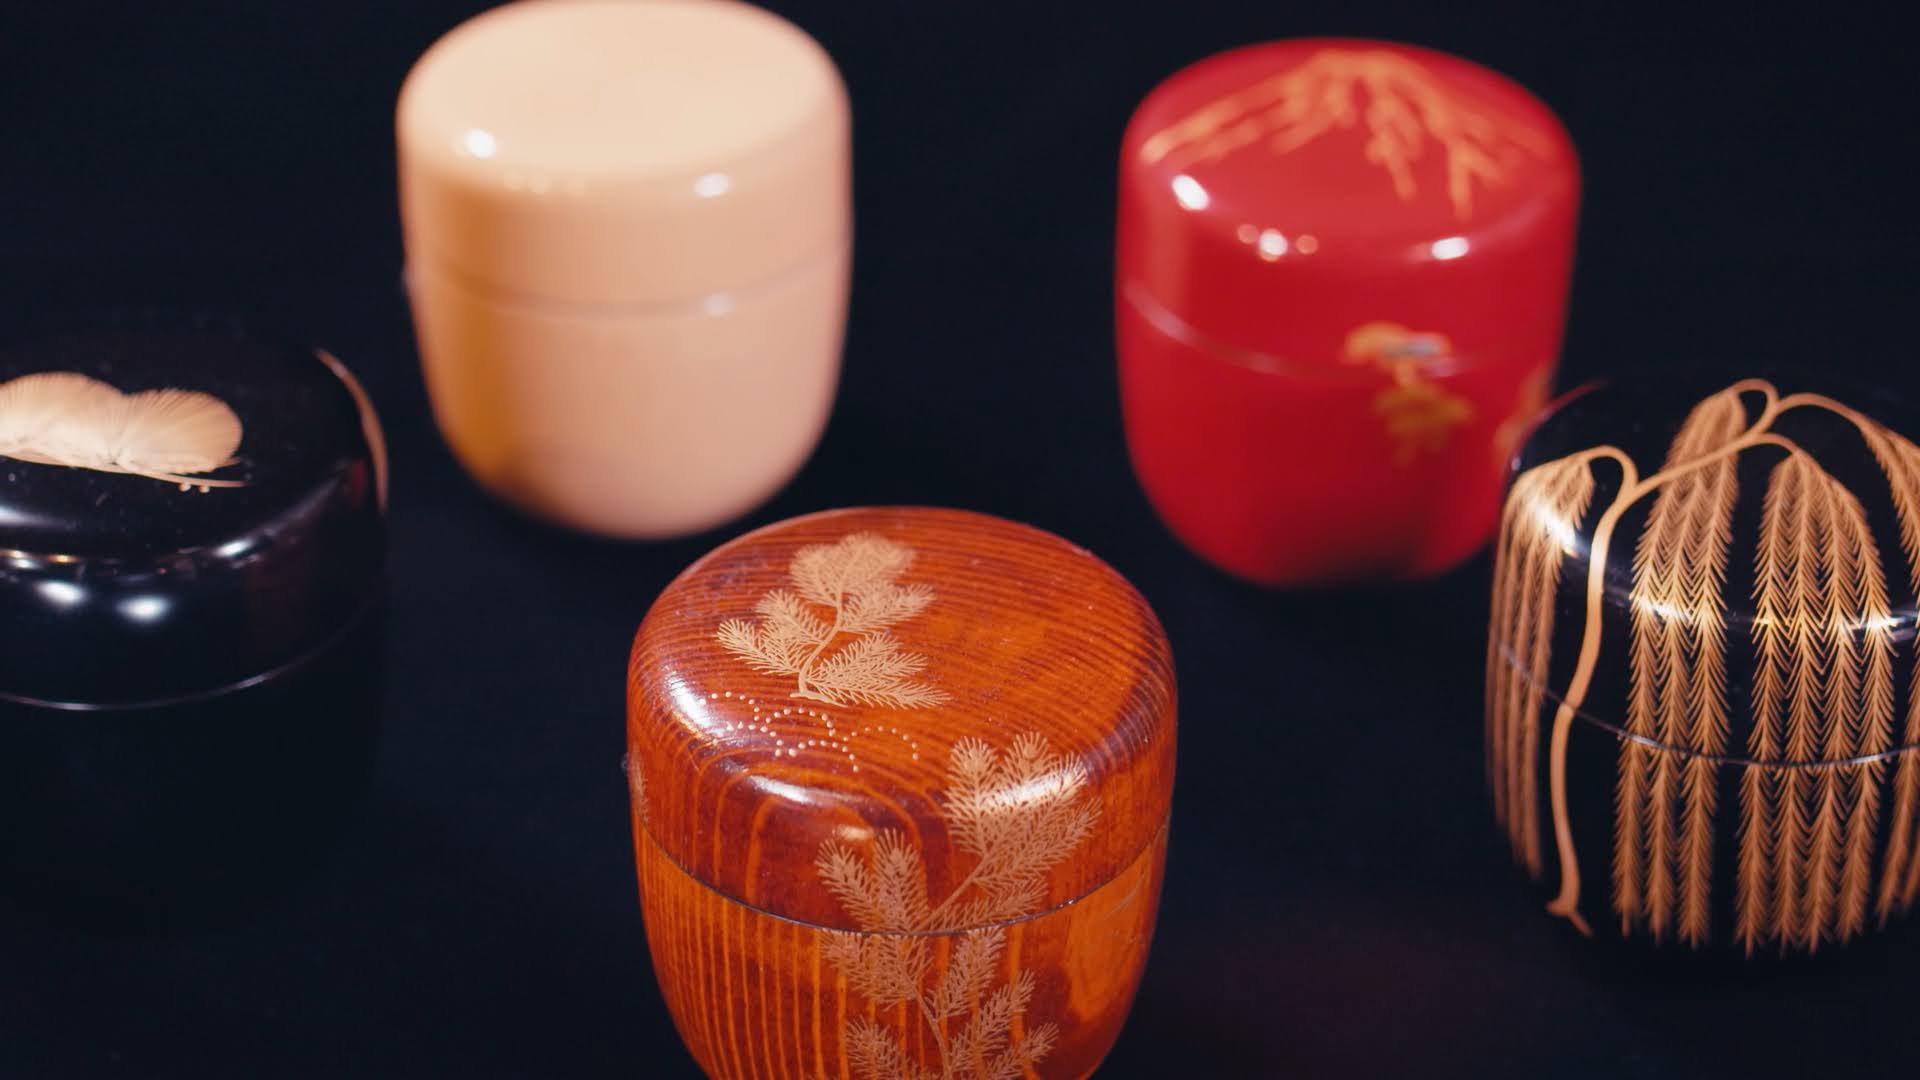 Pottery, a traditional craft of Nagano Prefecture in various colors